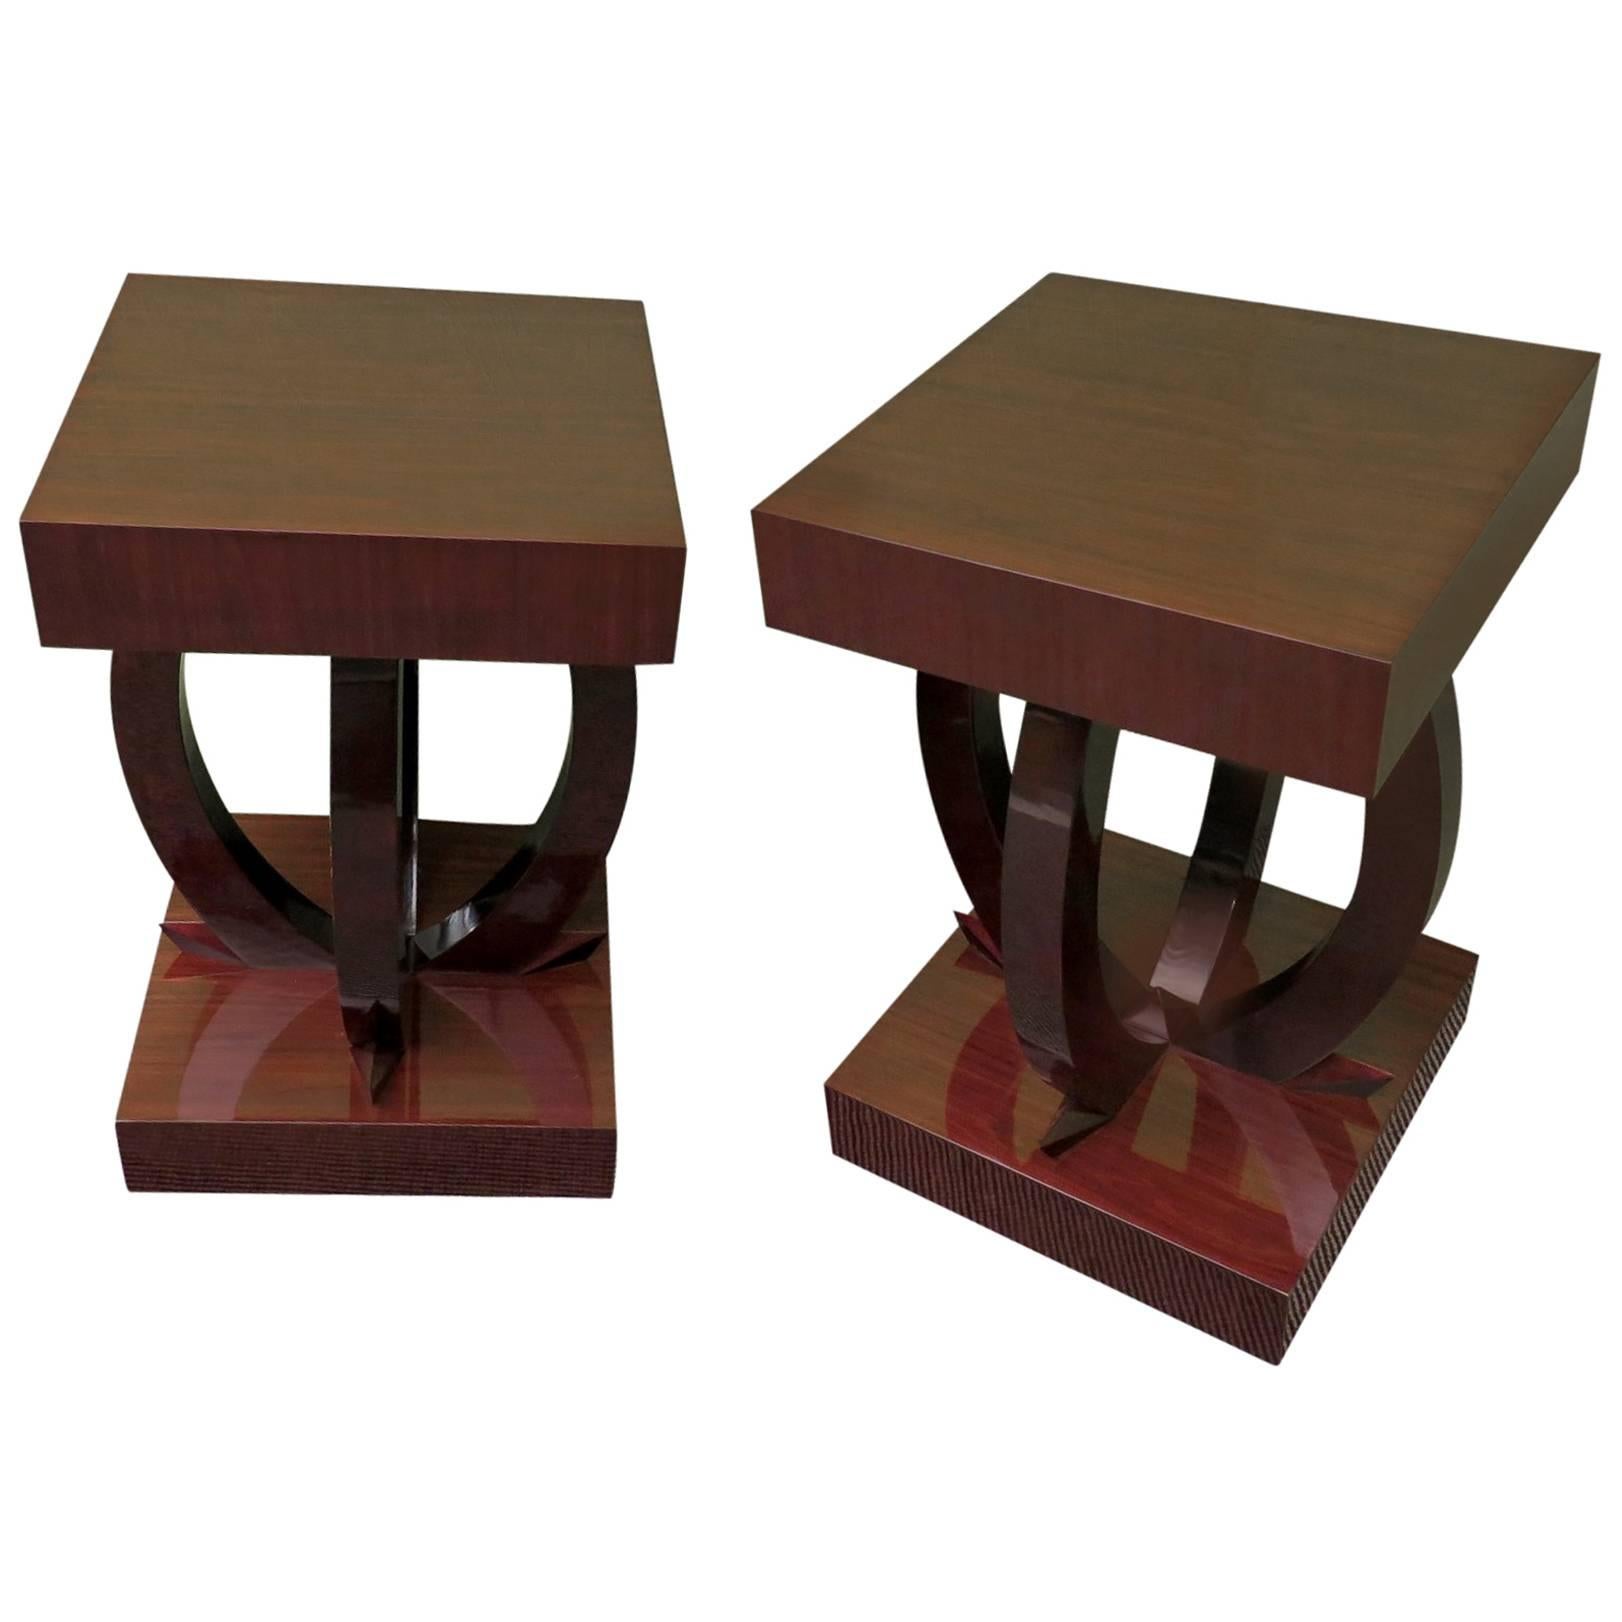 Pair of 1930 Square Mahogany Stained Black Italian Art Deco Side Tables